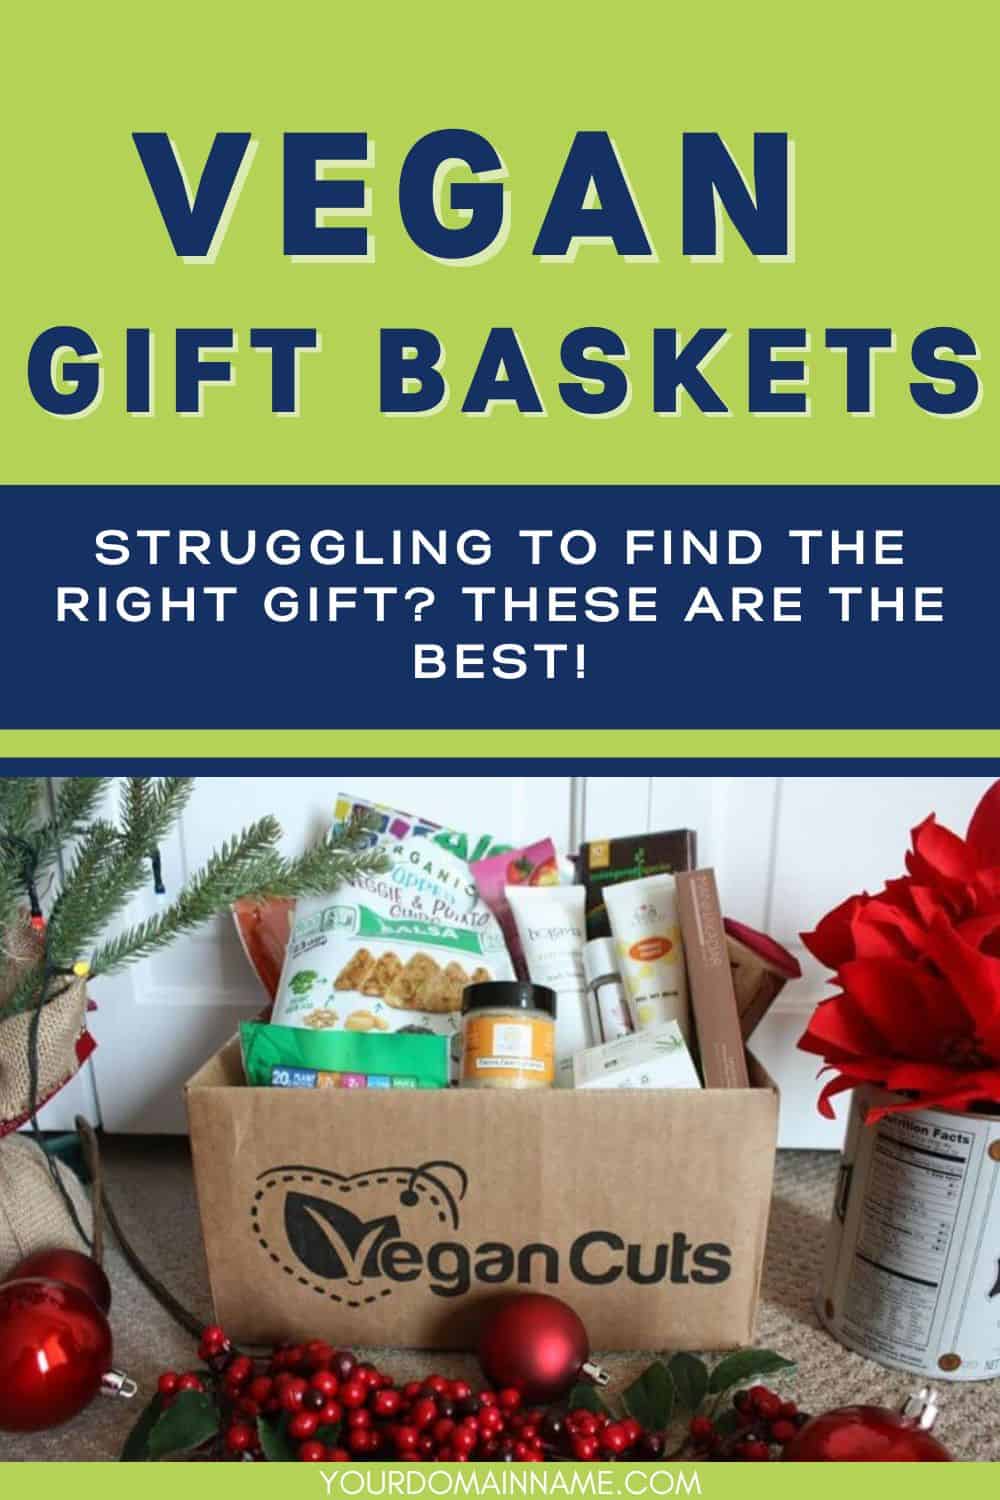 Pinterest image showing a vegan cuts gift basket and text that reads "vegan gift baskets: struggling to find the right gift? these are the best!"